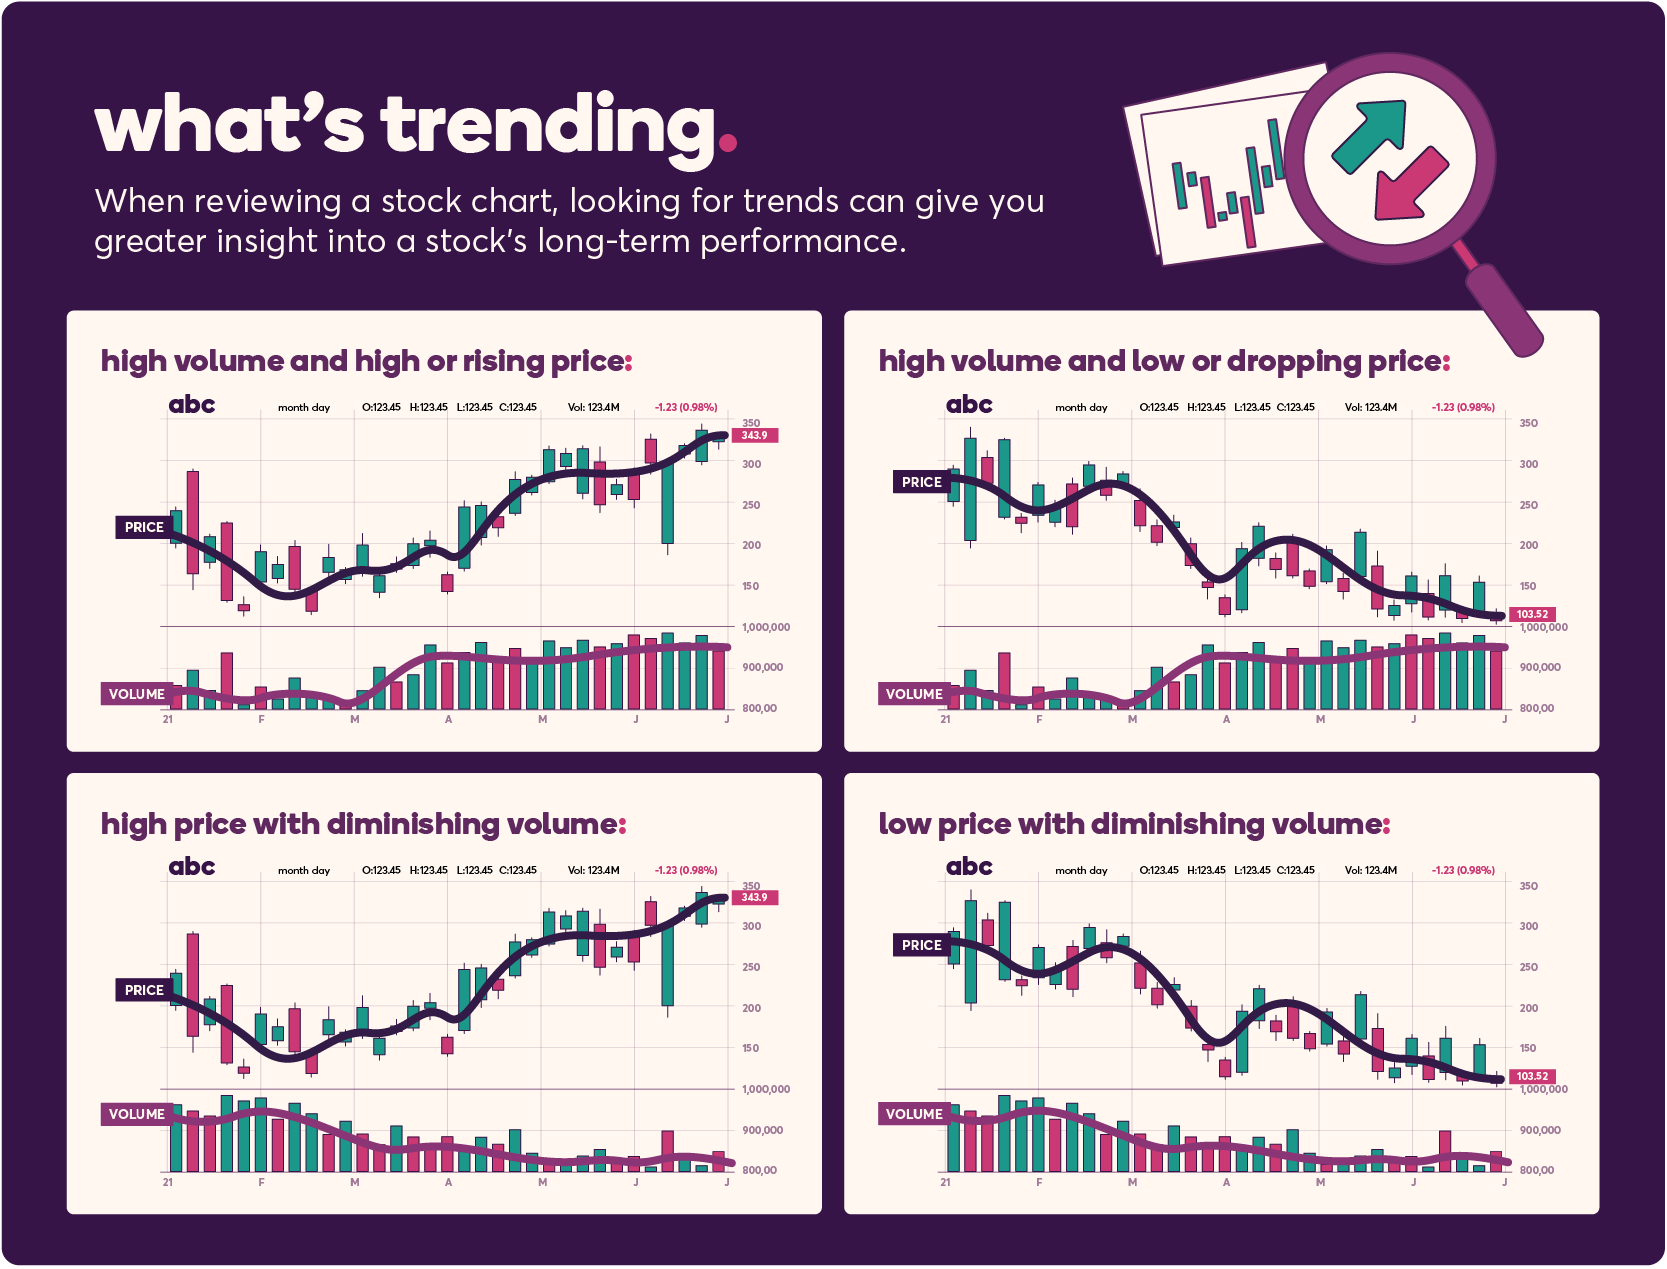 What’s trending? When reviewing a stock chart, looking for trends can give you greater insight into a stock’s long-term performance. A few patterns you might see include high volume and high or rising price; high volume and low or dropping price; high price with diminishing volume; and low price with diminishing volume.